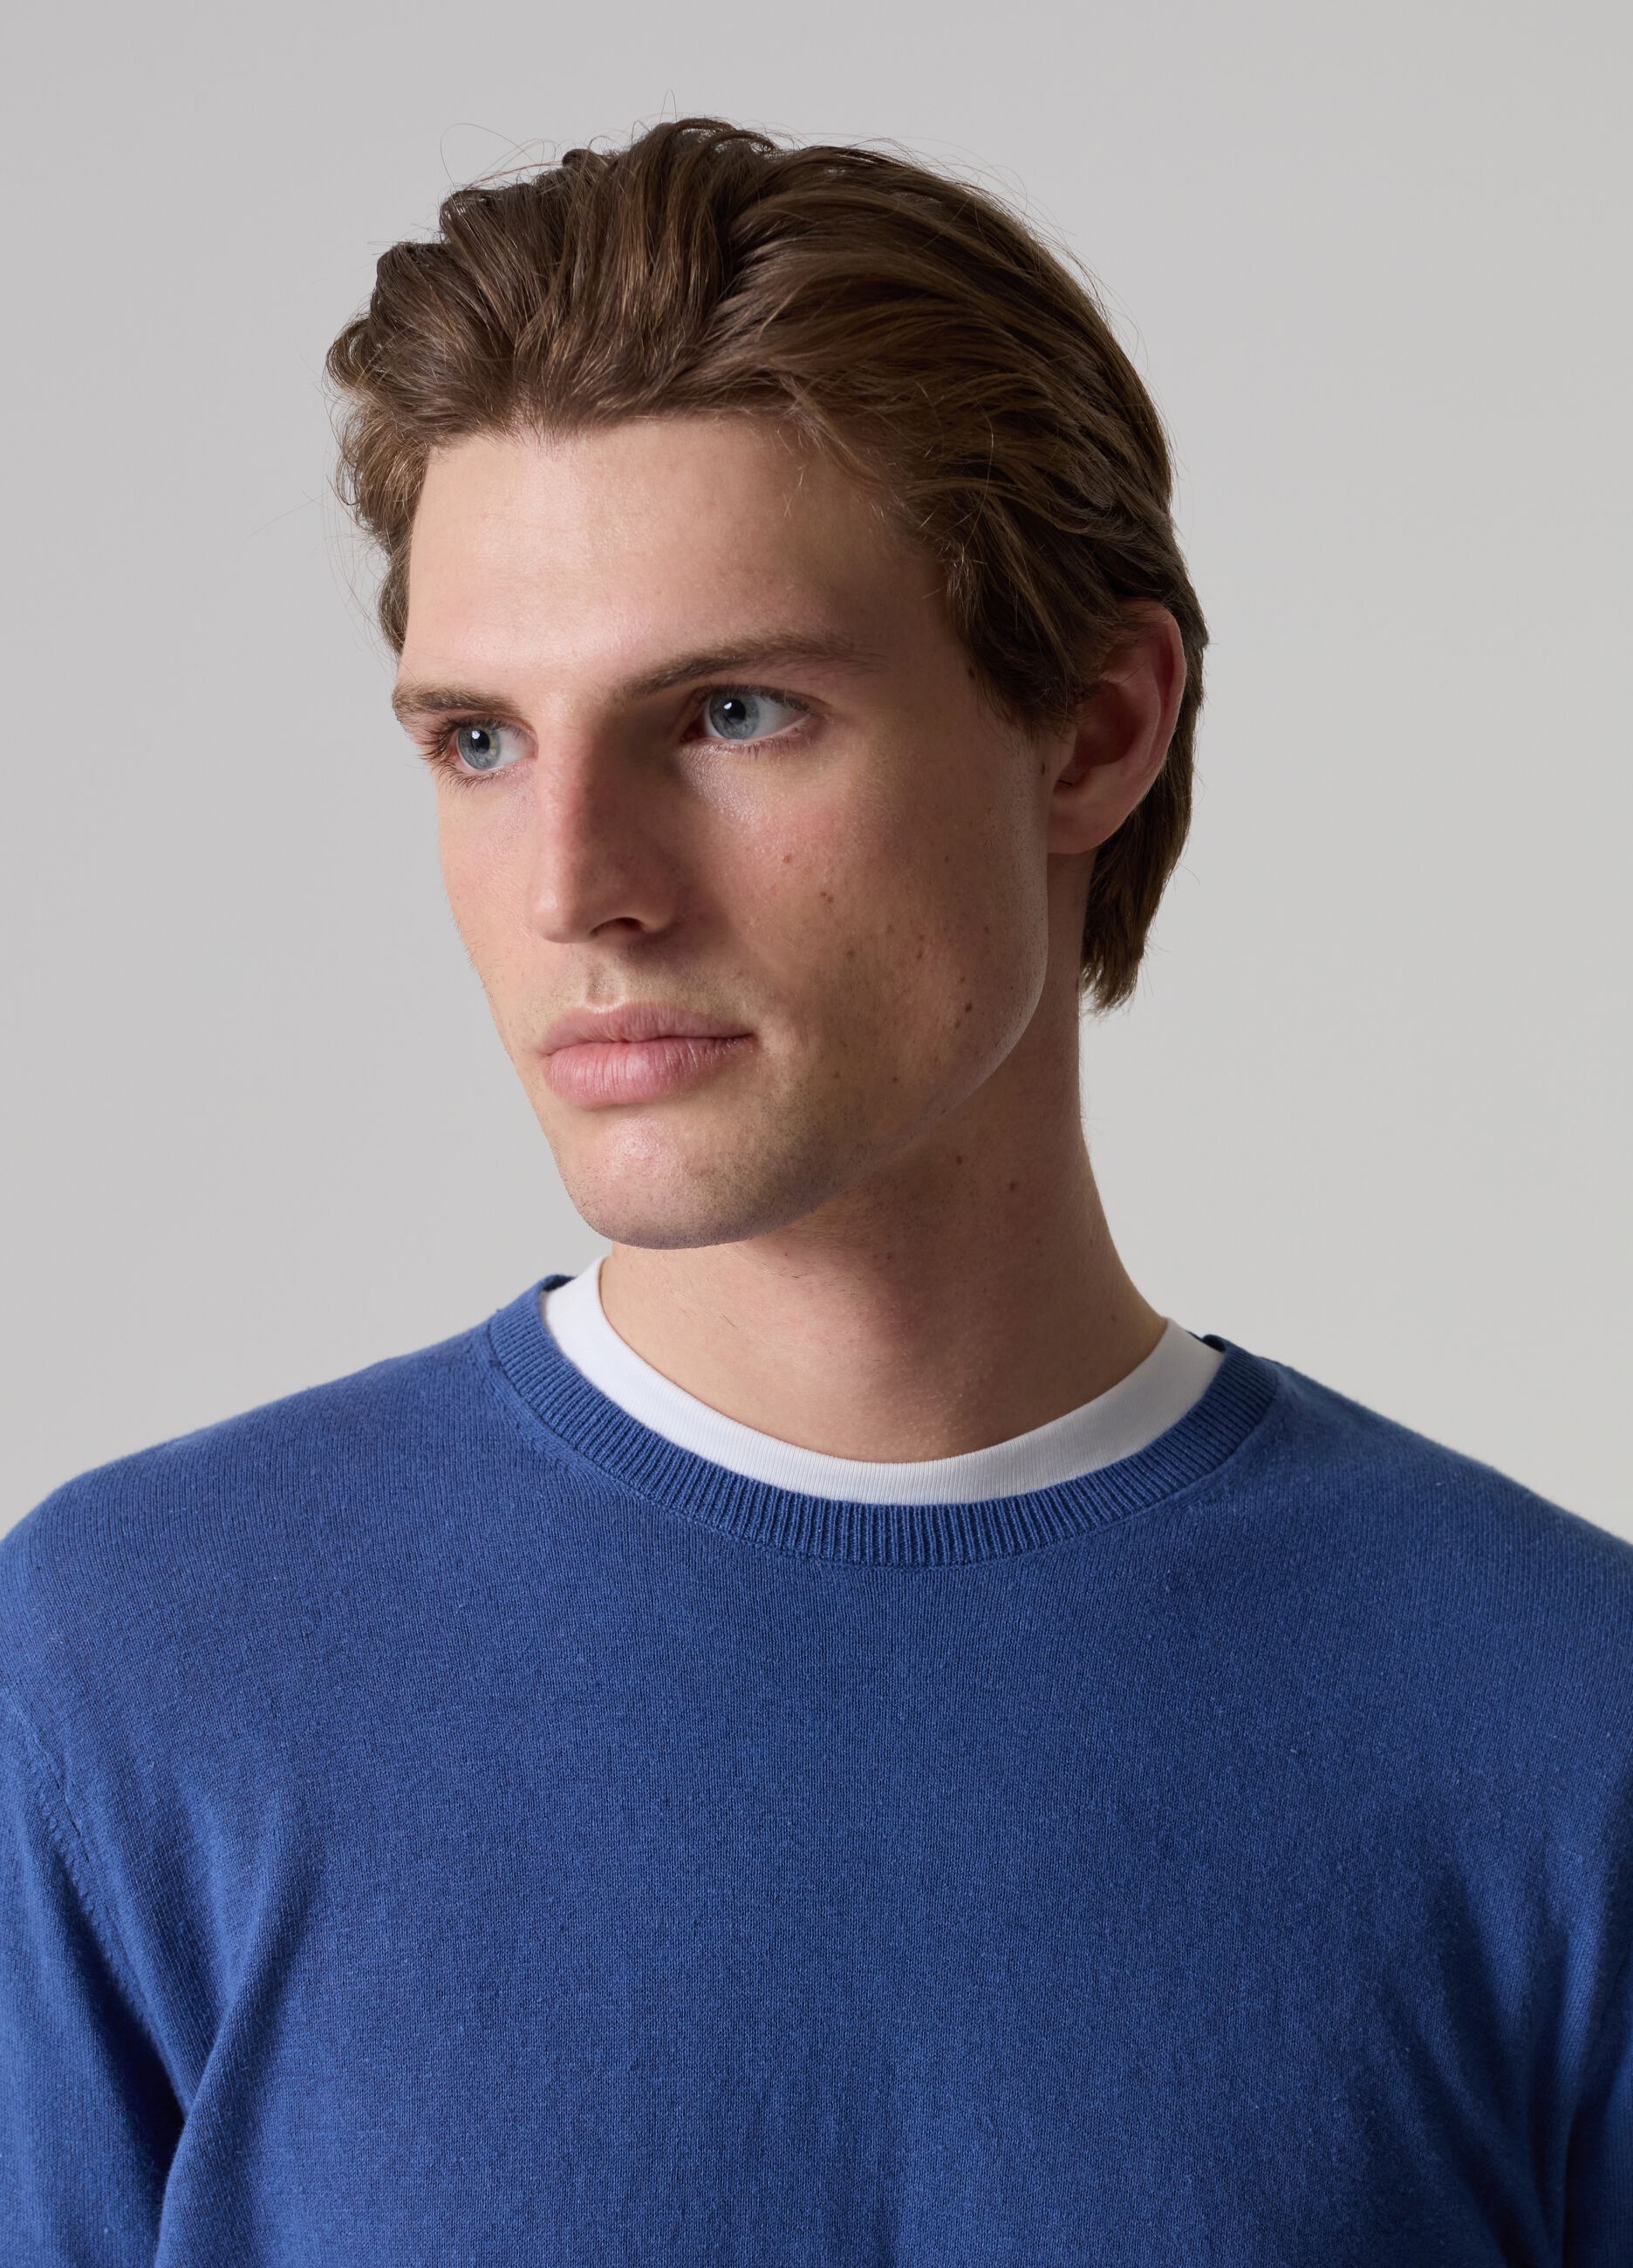 Contemporary pullover in cotton and hemp_1